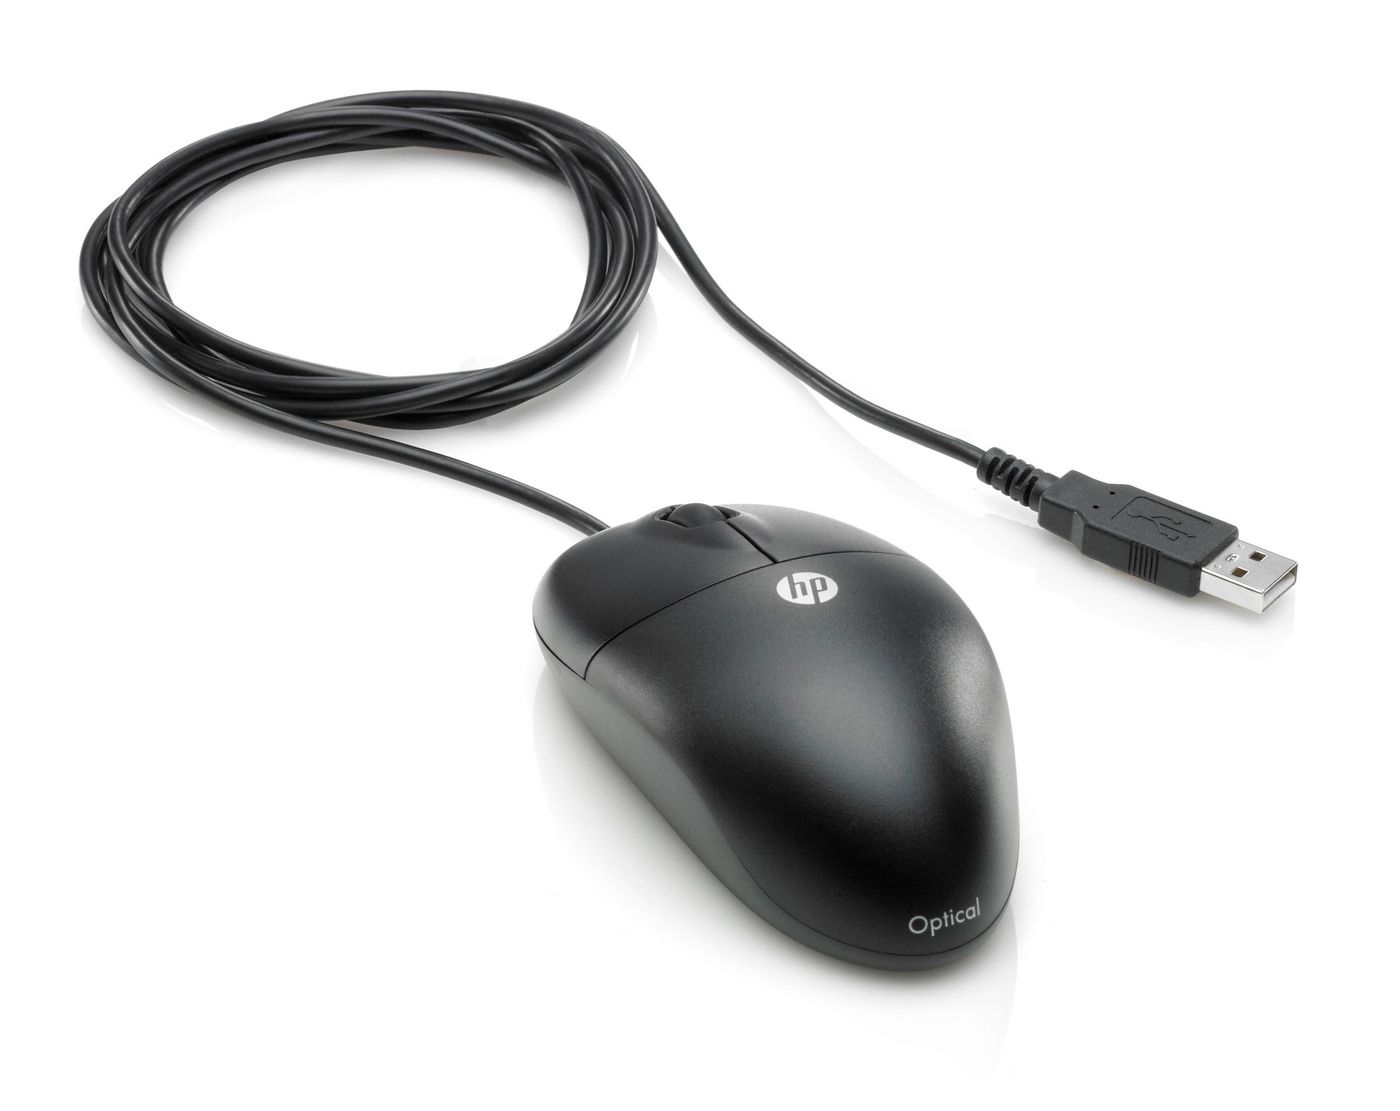 HP MOFYUO - USB Optical 2-Button Wired Scroll Mouse - CPU Medics